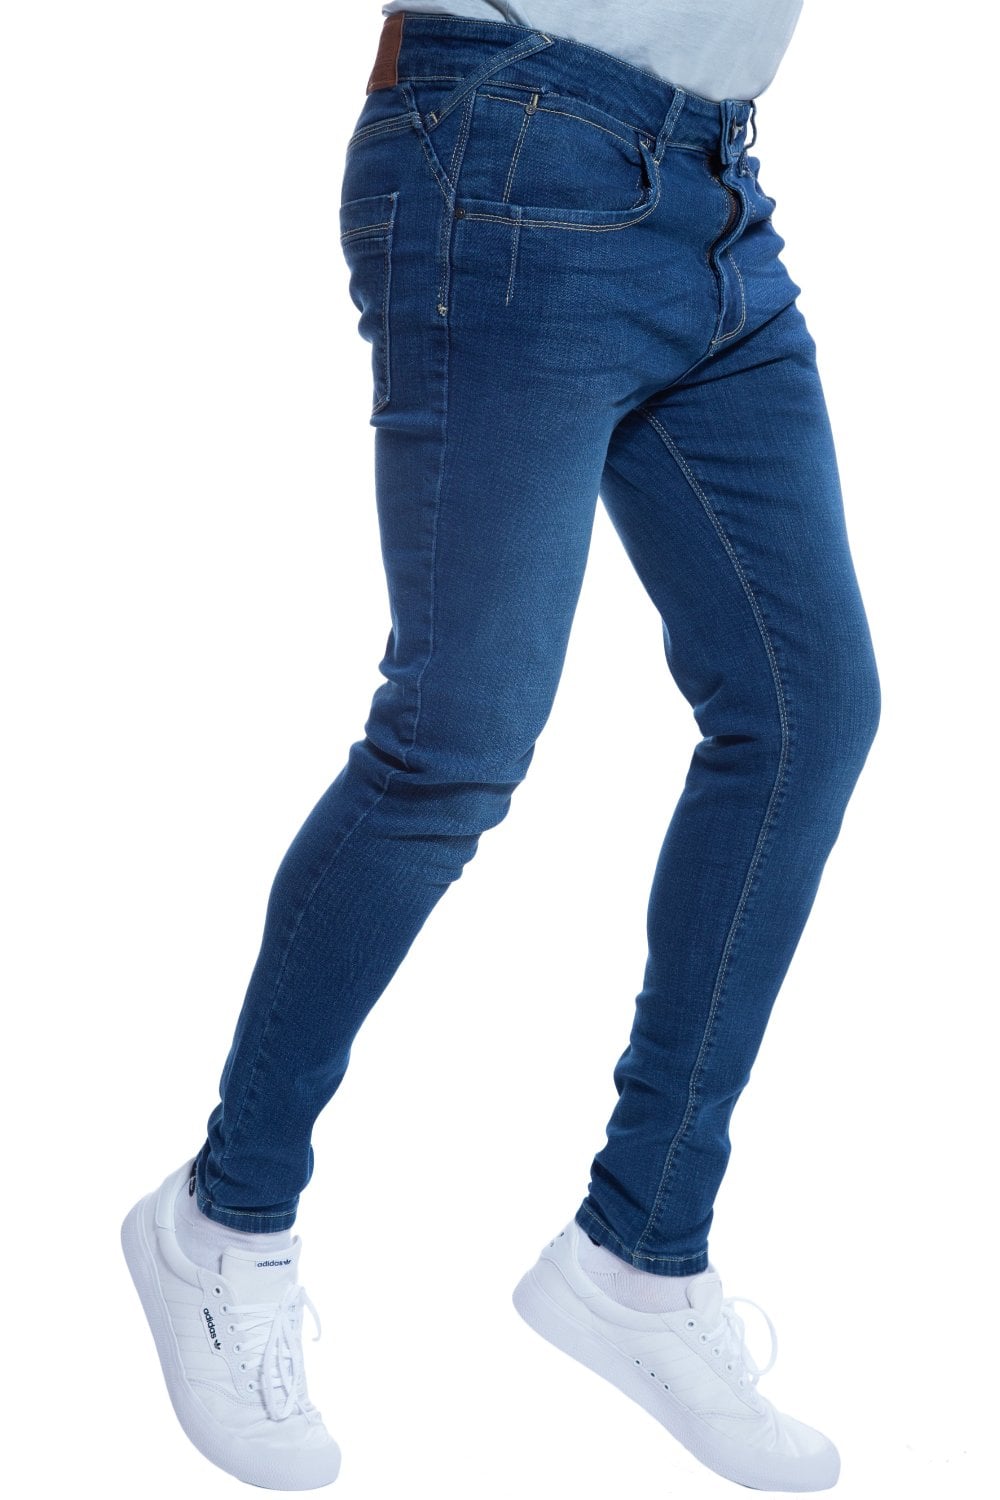 Skinny Fit Jeans - Twisted Soul | Men's Clothing